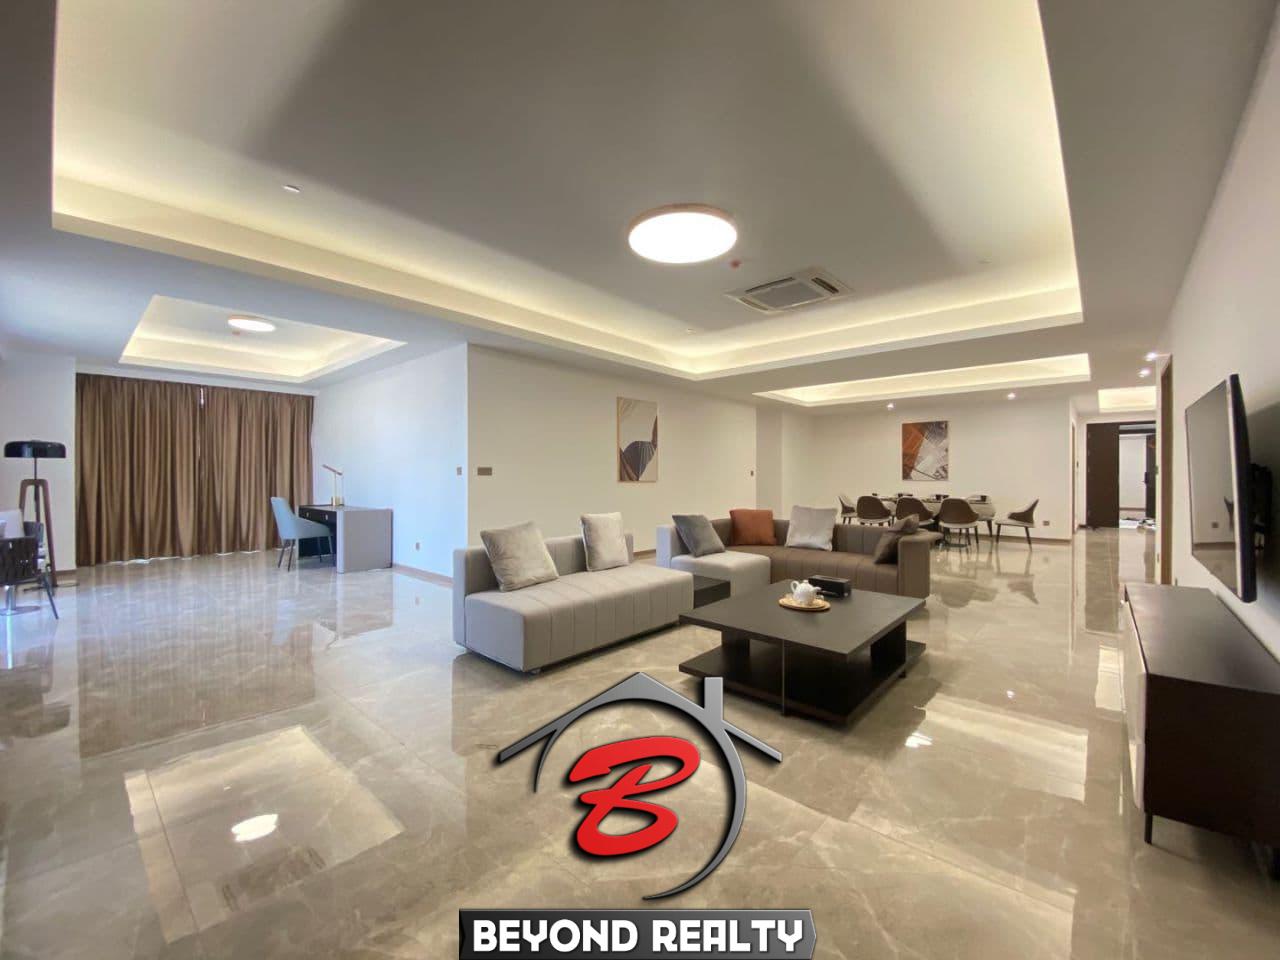 the living room 3-bedroom luxury spacious serviced flat for rent in Veal Vong 7 Makara Phnom Penh Cambodia